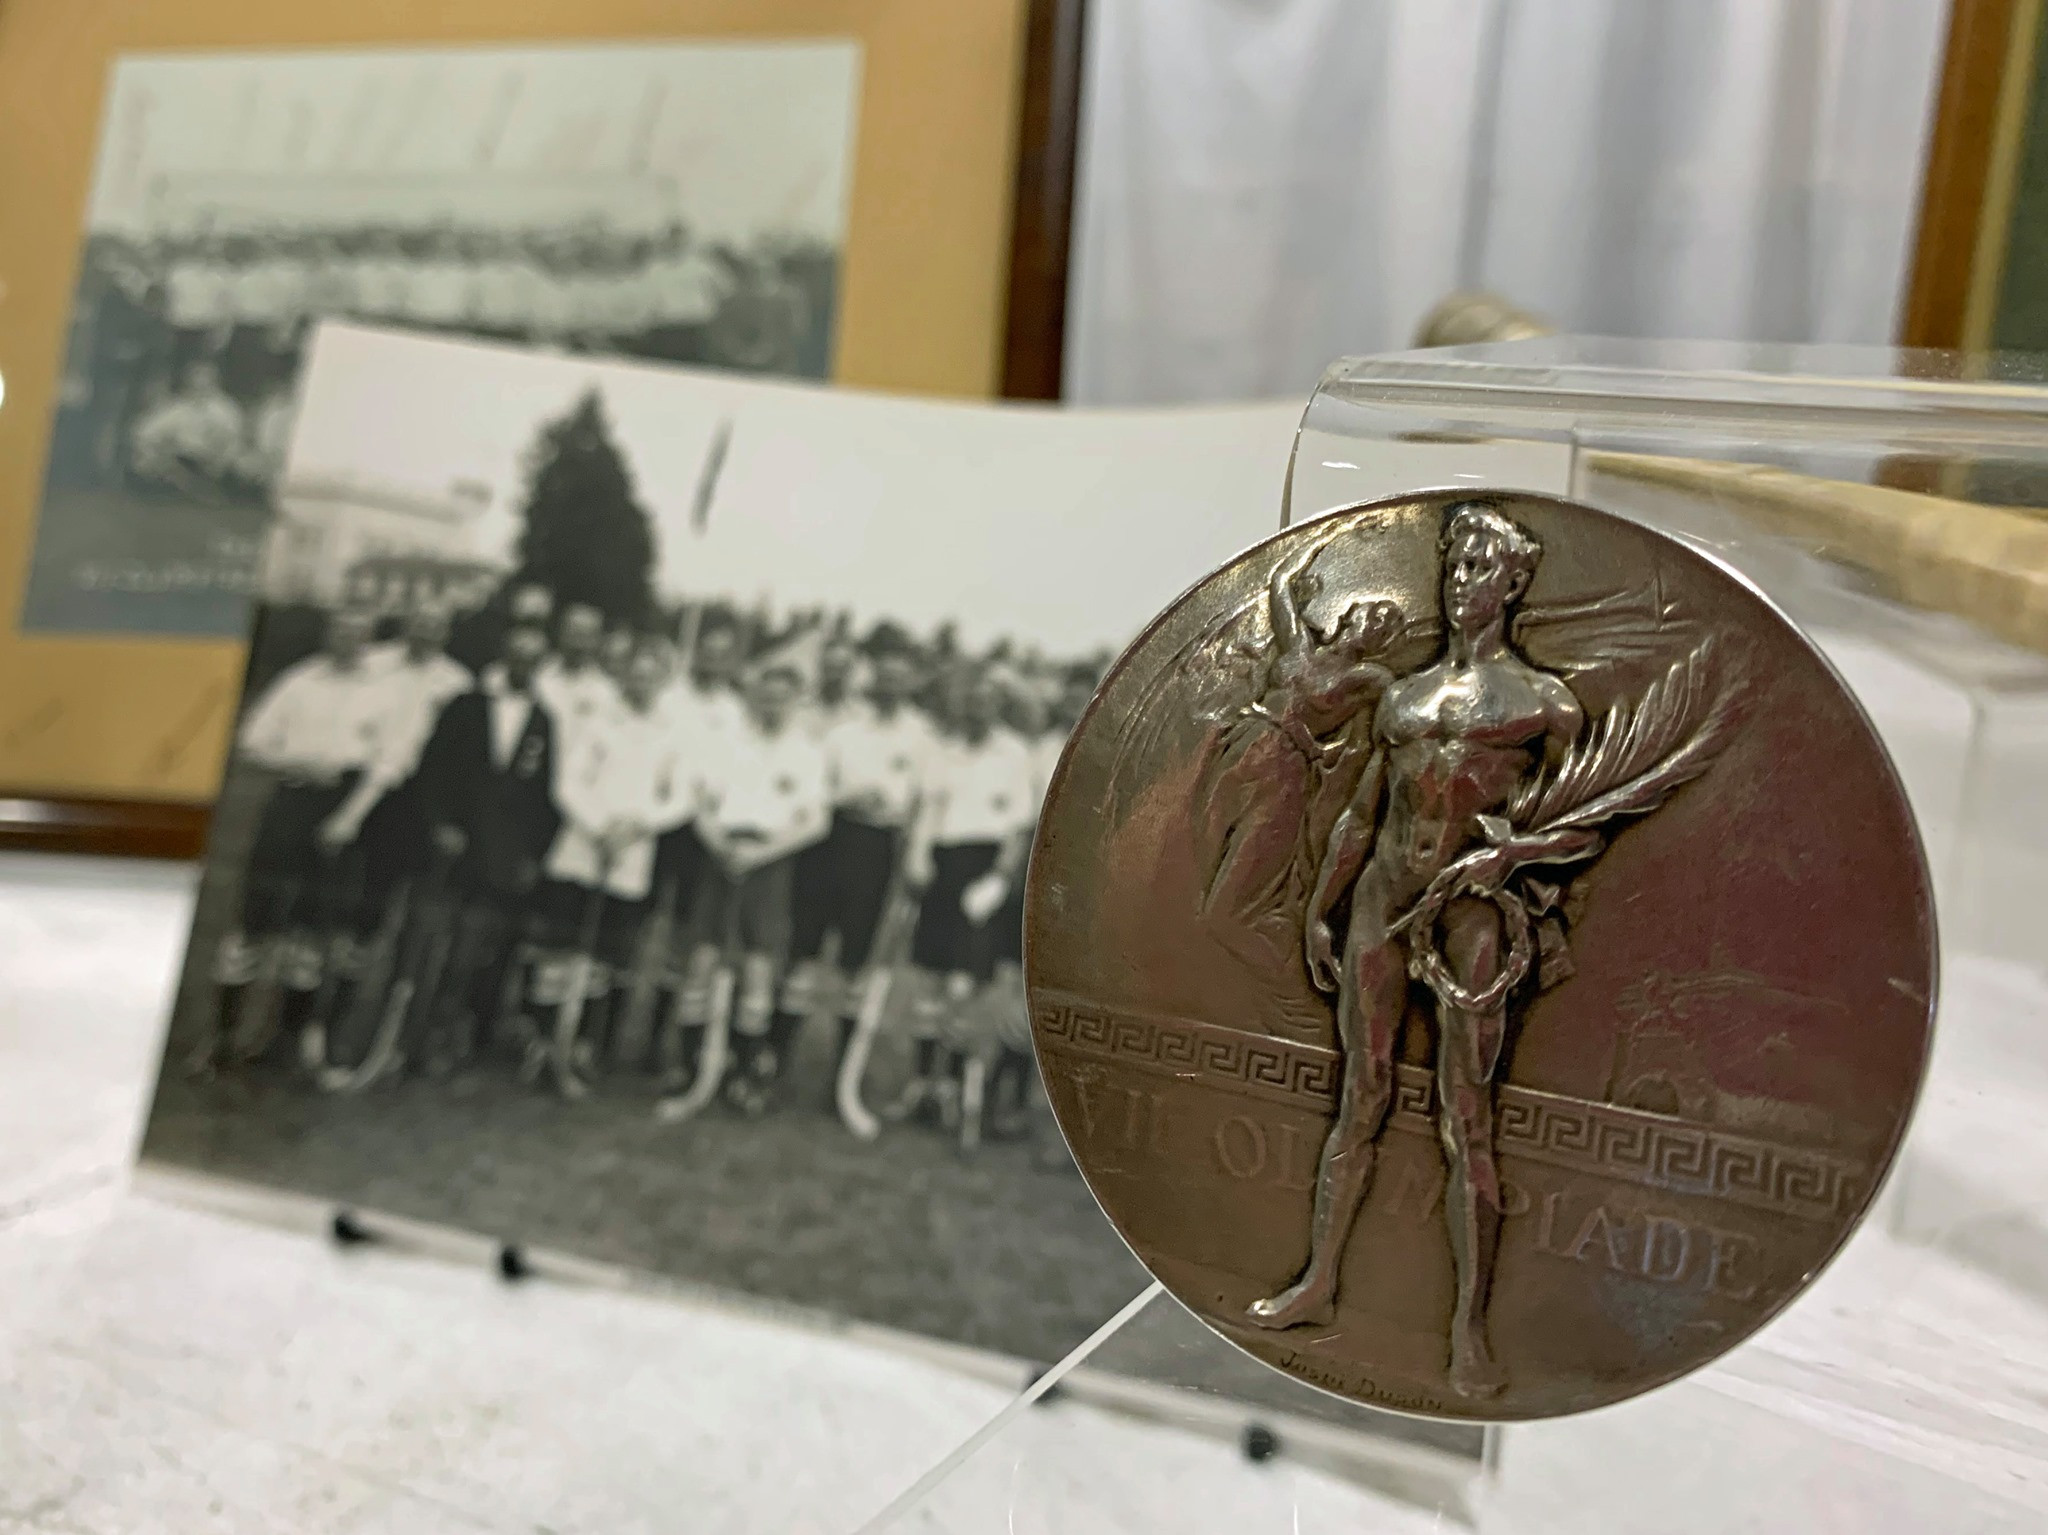 Antwerp 1920 gold medal loaned to The Hockey Museum to celebrate centenary of Britain's victory